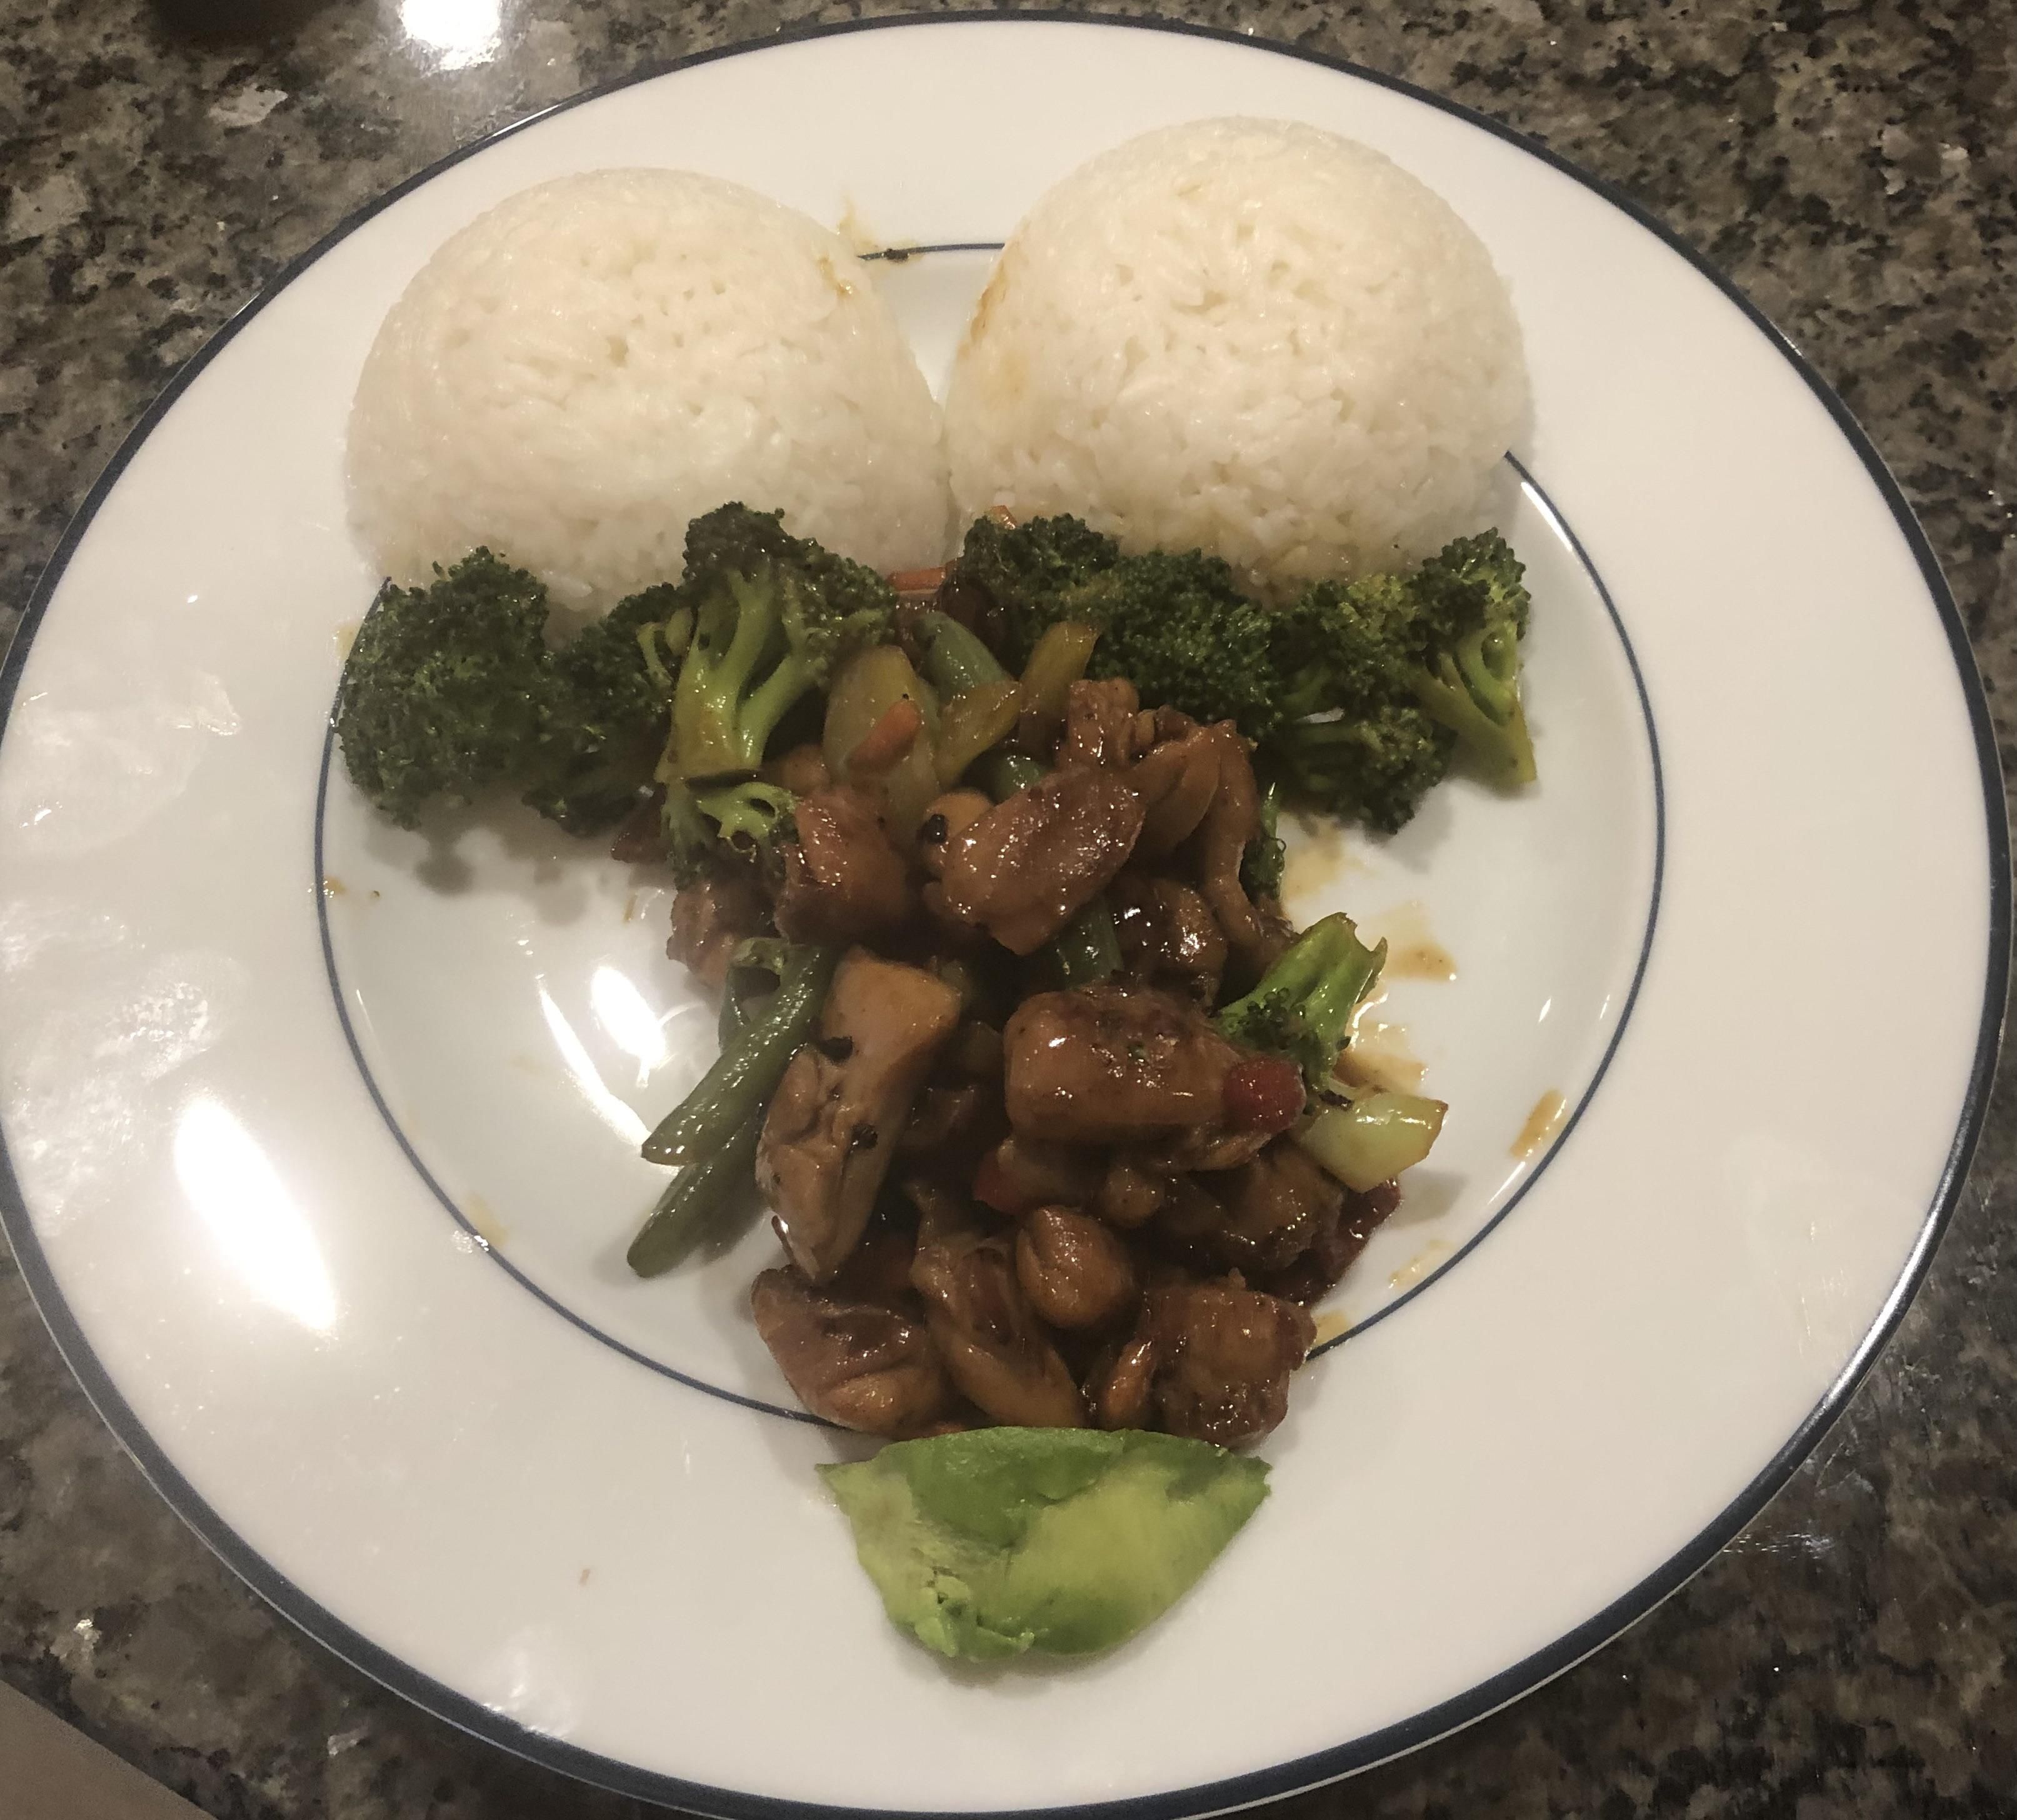 My husband presented me with beef and broccoli for dinner. His plating skills are ridickulous!